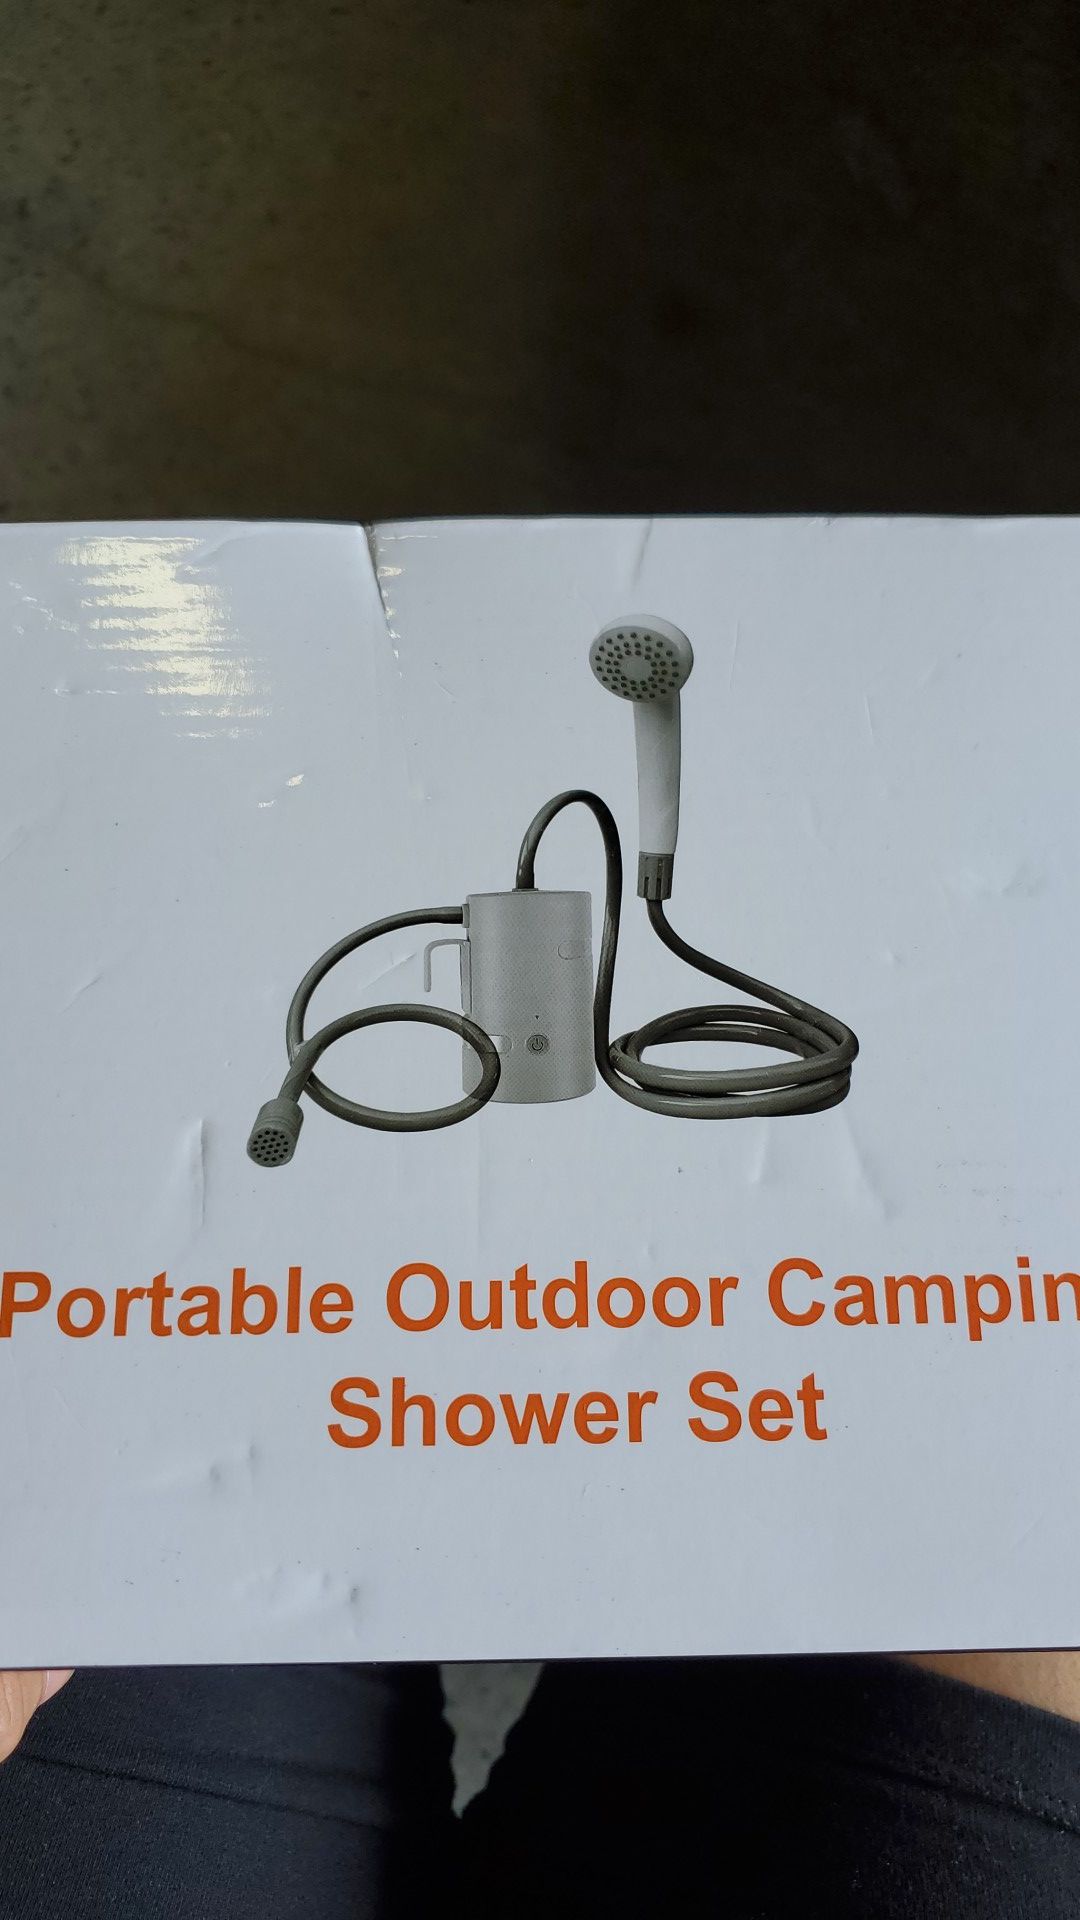 Portable Outdoor Camping Shower Set